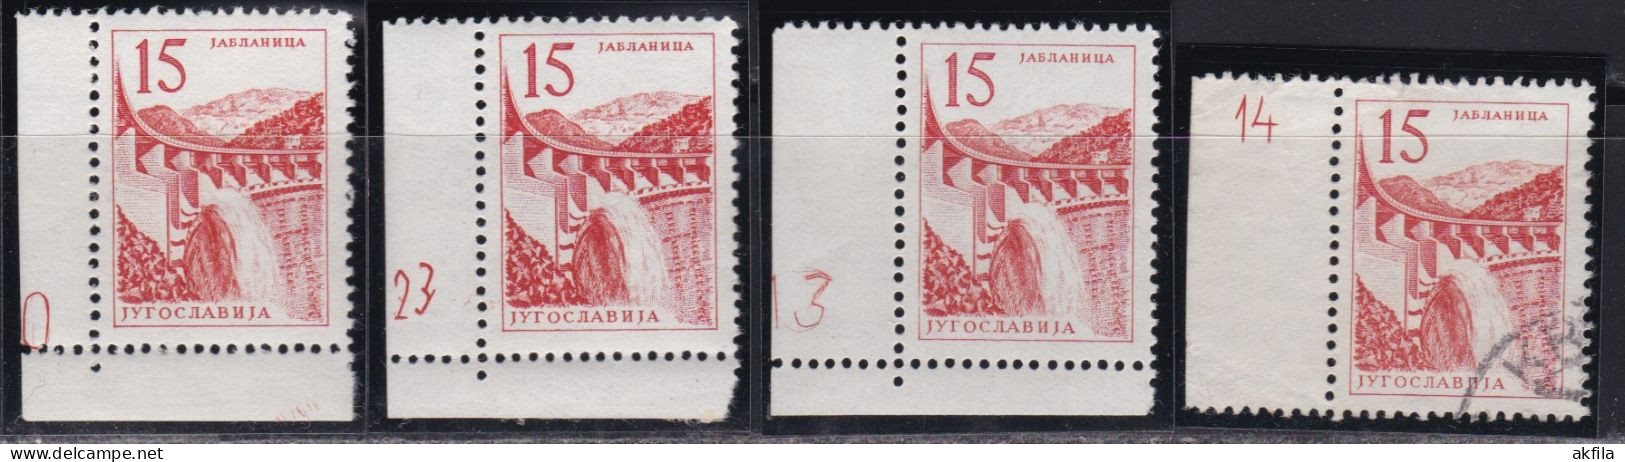 Yugoslavia 1958 Definitive Stamps With Printing Plate Markings, MNH And Used Michel 857. - Usati